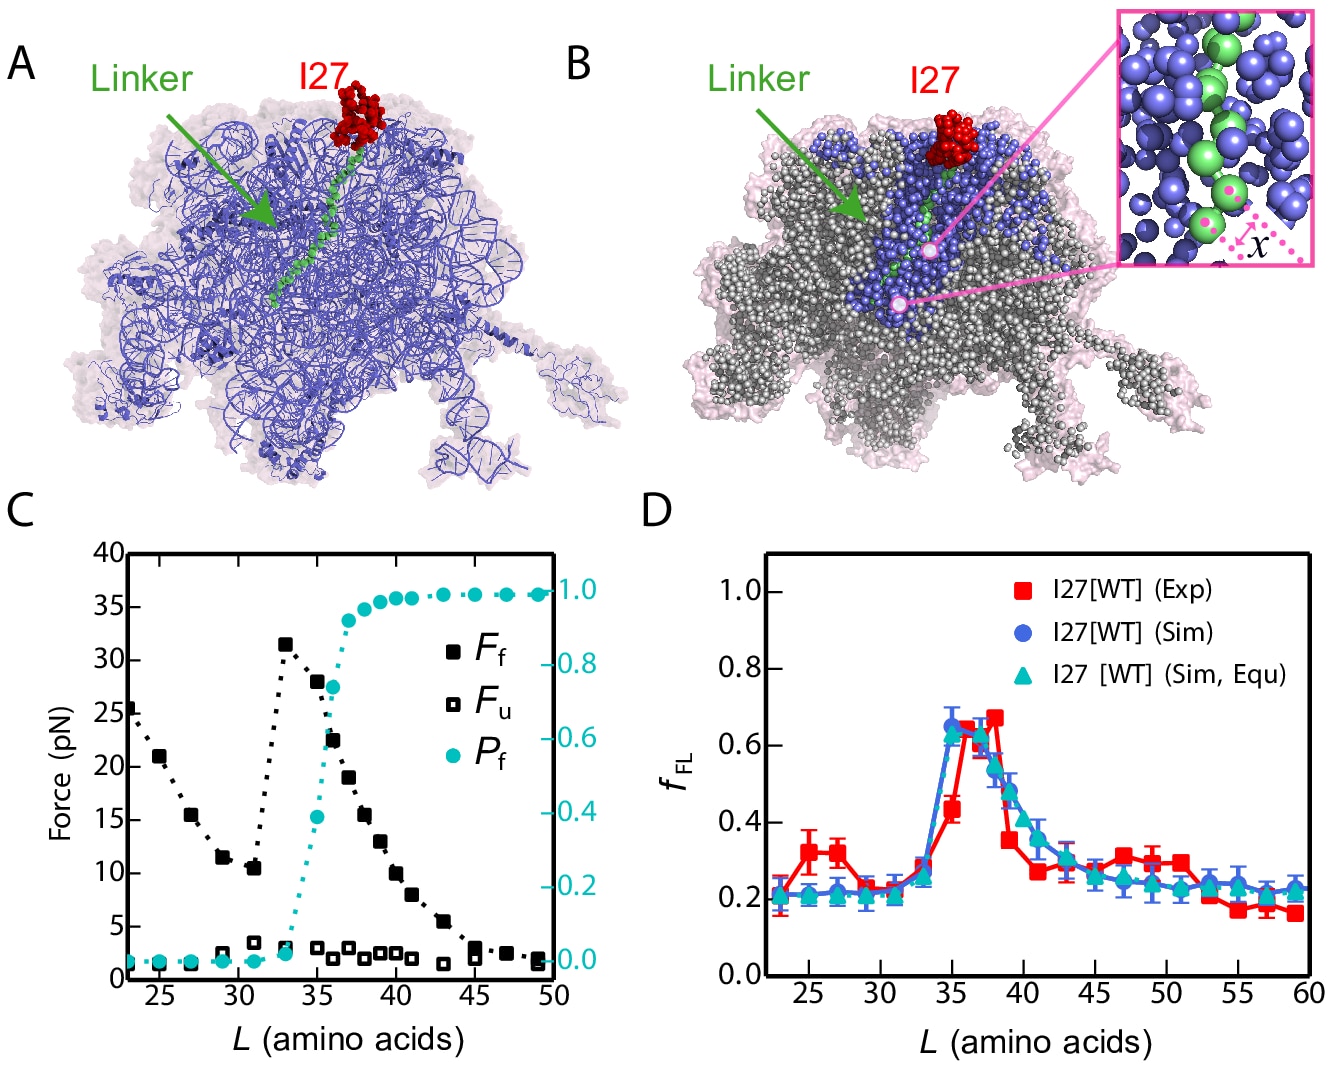 Coarse-grained molecular simulations of protein folding on the ribosome